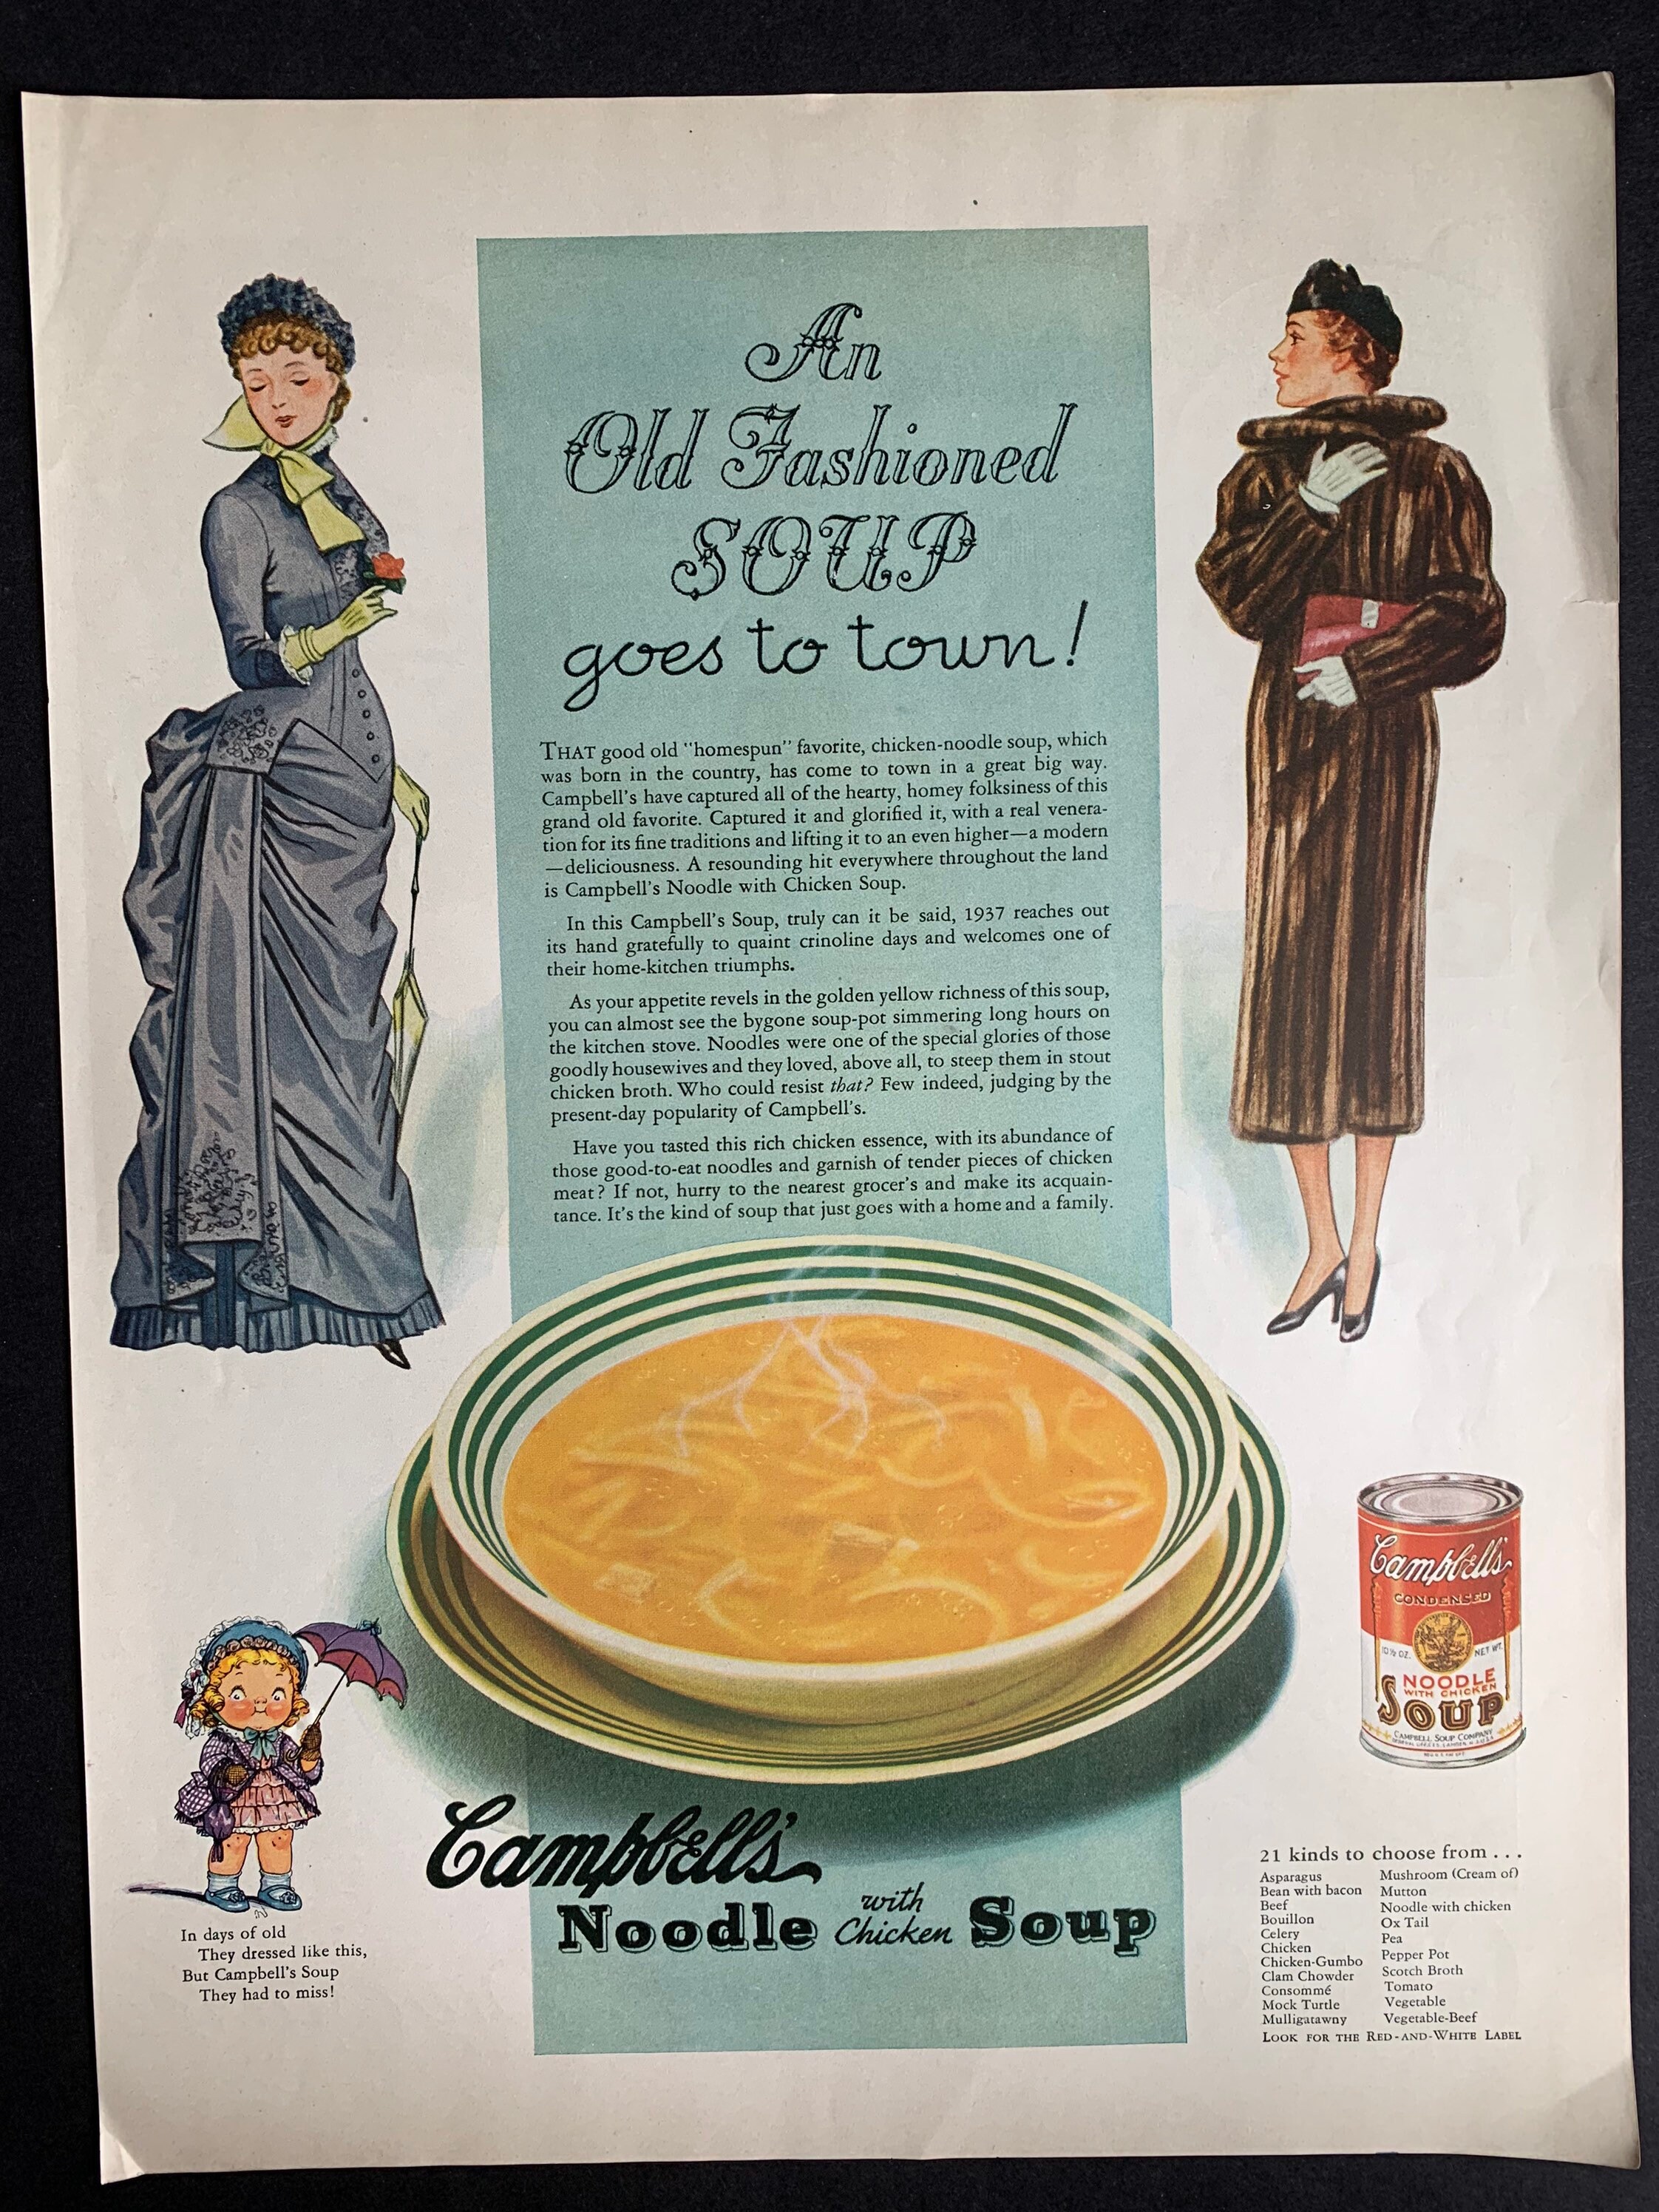 Vintage 1937 Campbell's Chicken Noodle Soup Print Ad